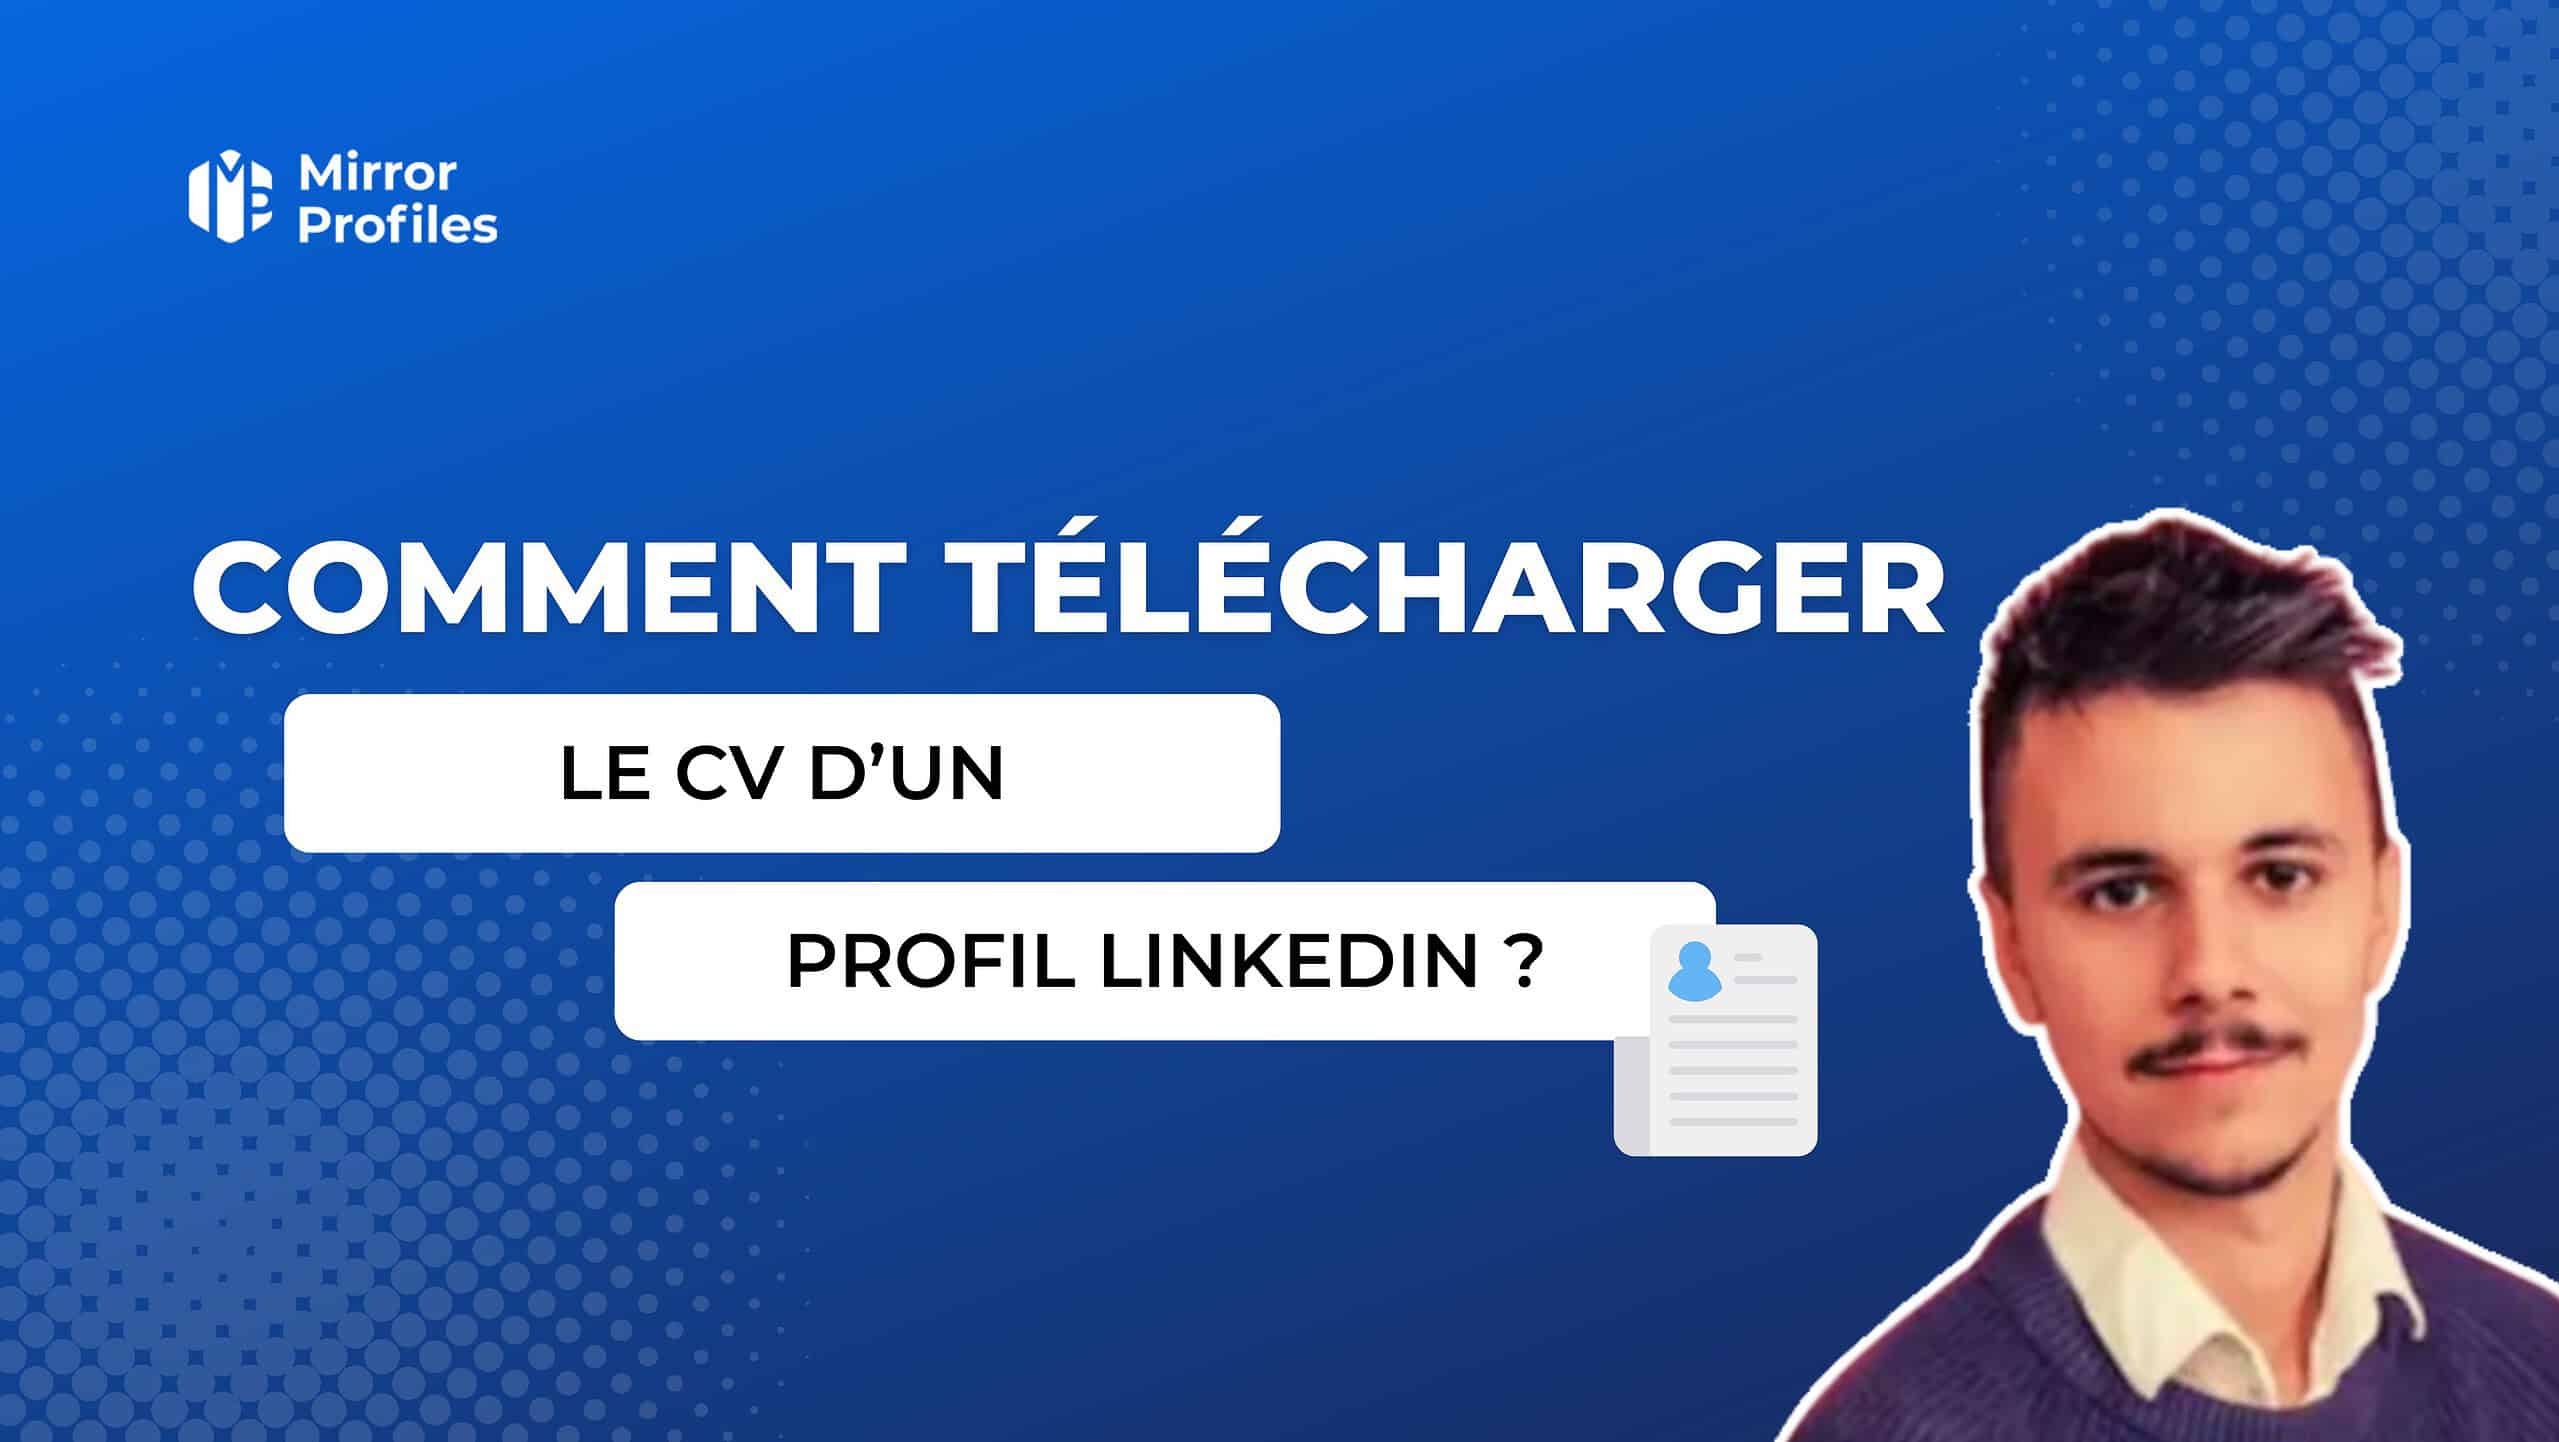 A man in a suit is pictured on a blue background with text that reads, "COMMENT TÉLÉCHARGER LE CV D'UN PROFIL LINKEDIN?" There is a logo in the top left corner that says "Mirror Profiles." This image guides users on how to download the CV from a LinkedIn profile.